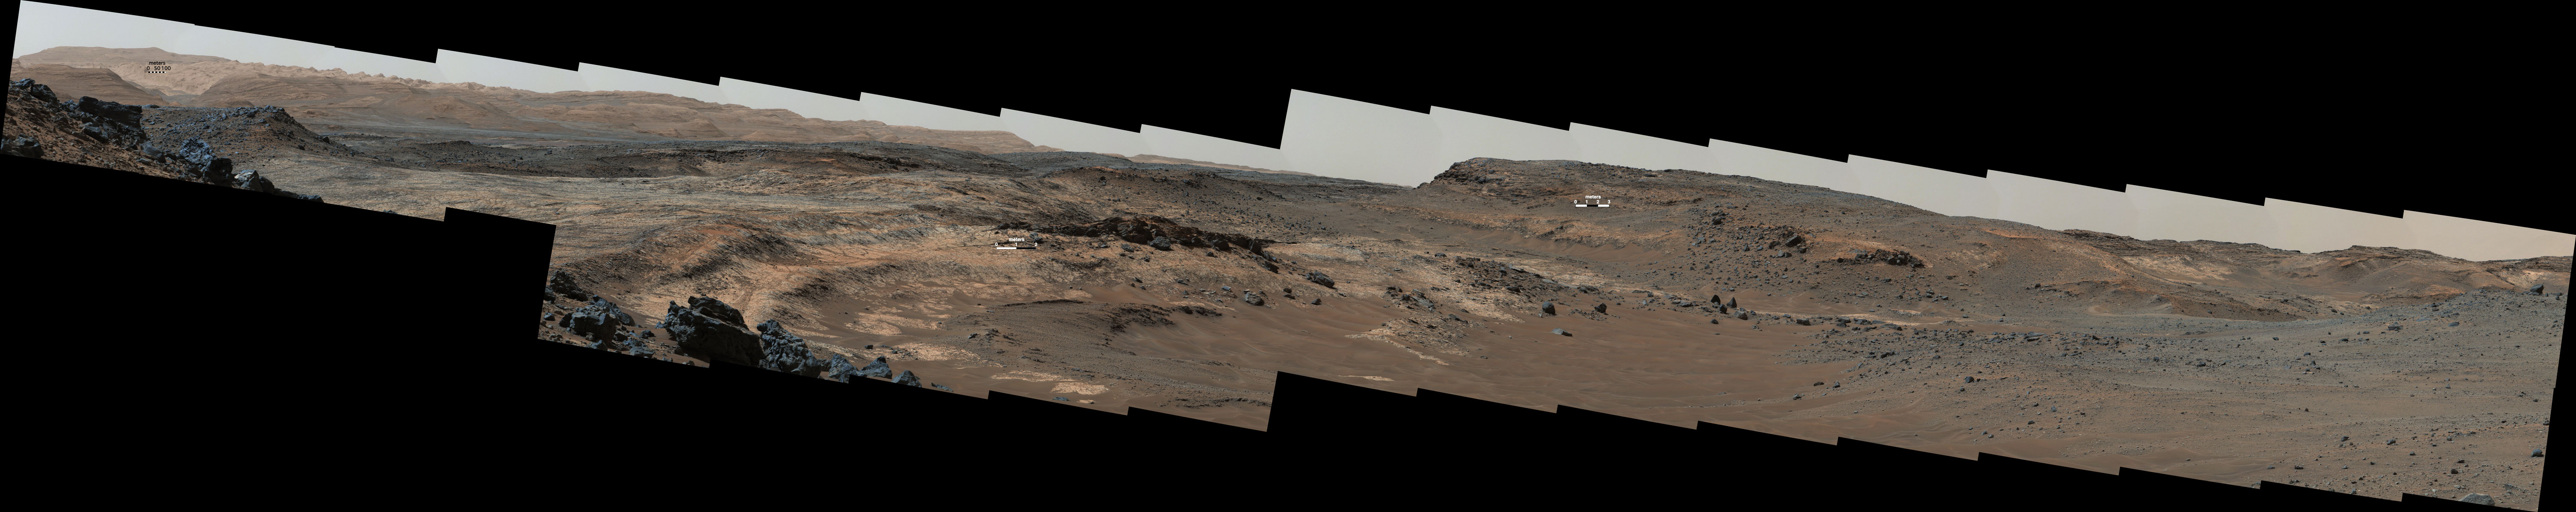 A sweeping panorama combining 33 telephoto images into one Martian vista presents details of several types of terrain visible on Mount Sharp from a location along the route of NASA's Curiosity Mars rover. The component images were taken by the rover's Mast Camera on April 10, 2015.